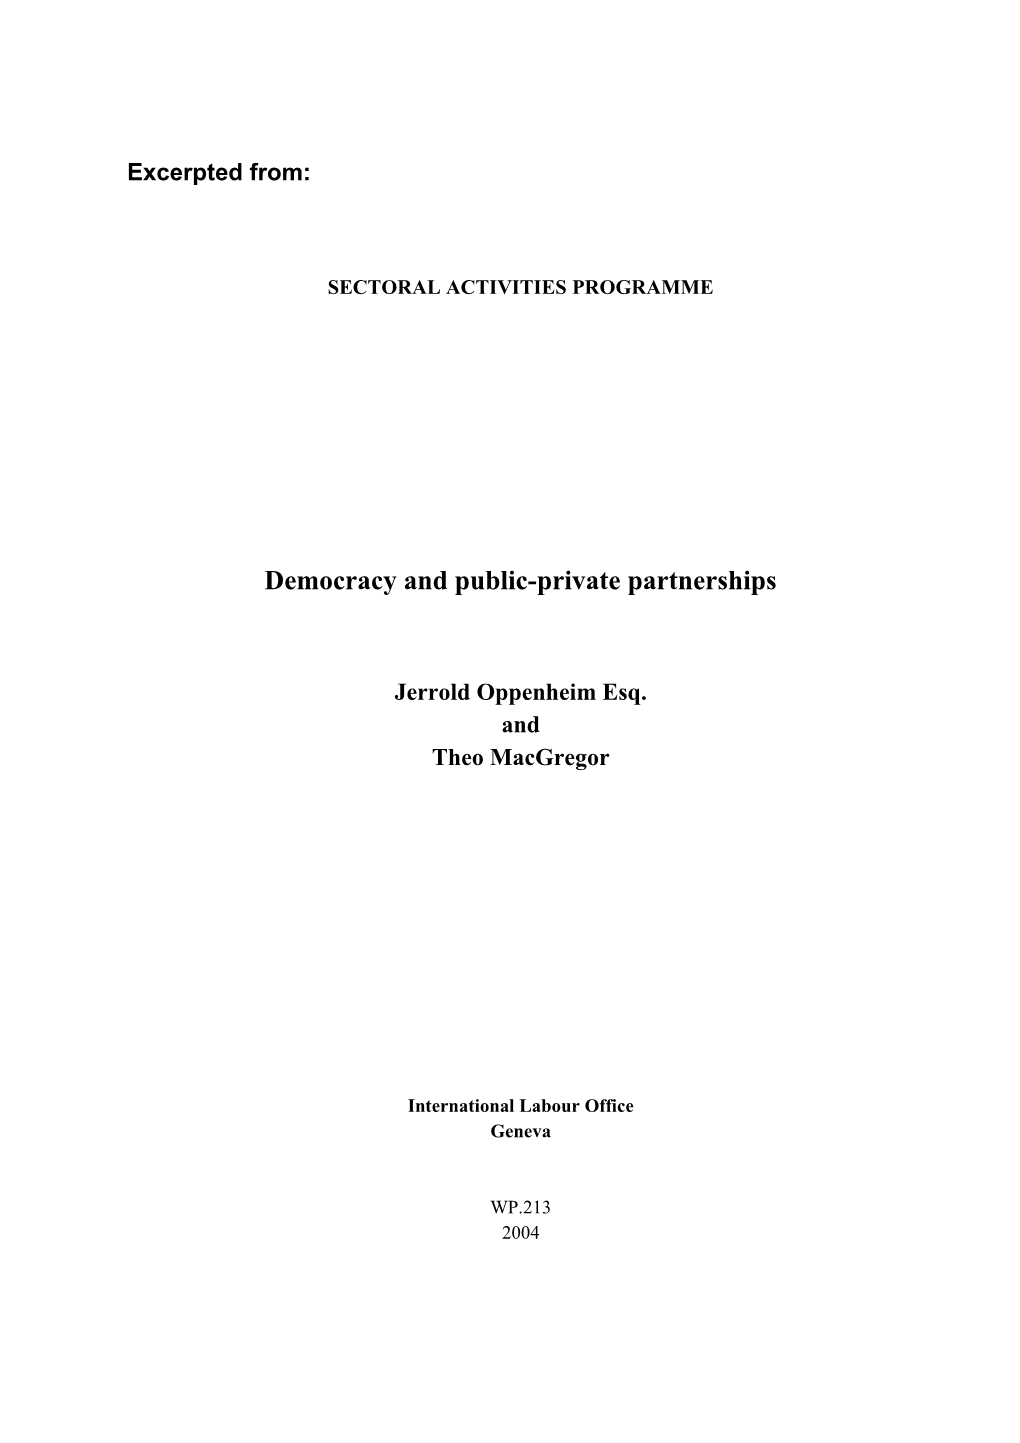 Democracy and Public-Private Partnerships